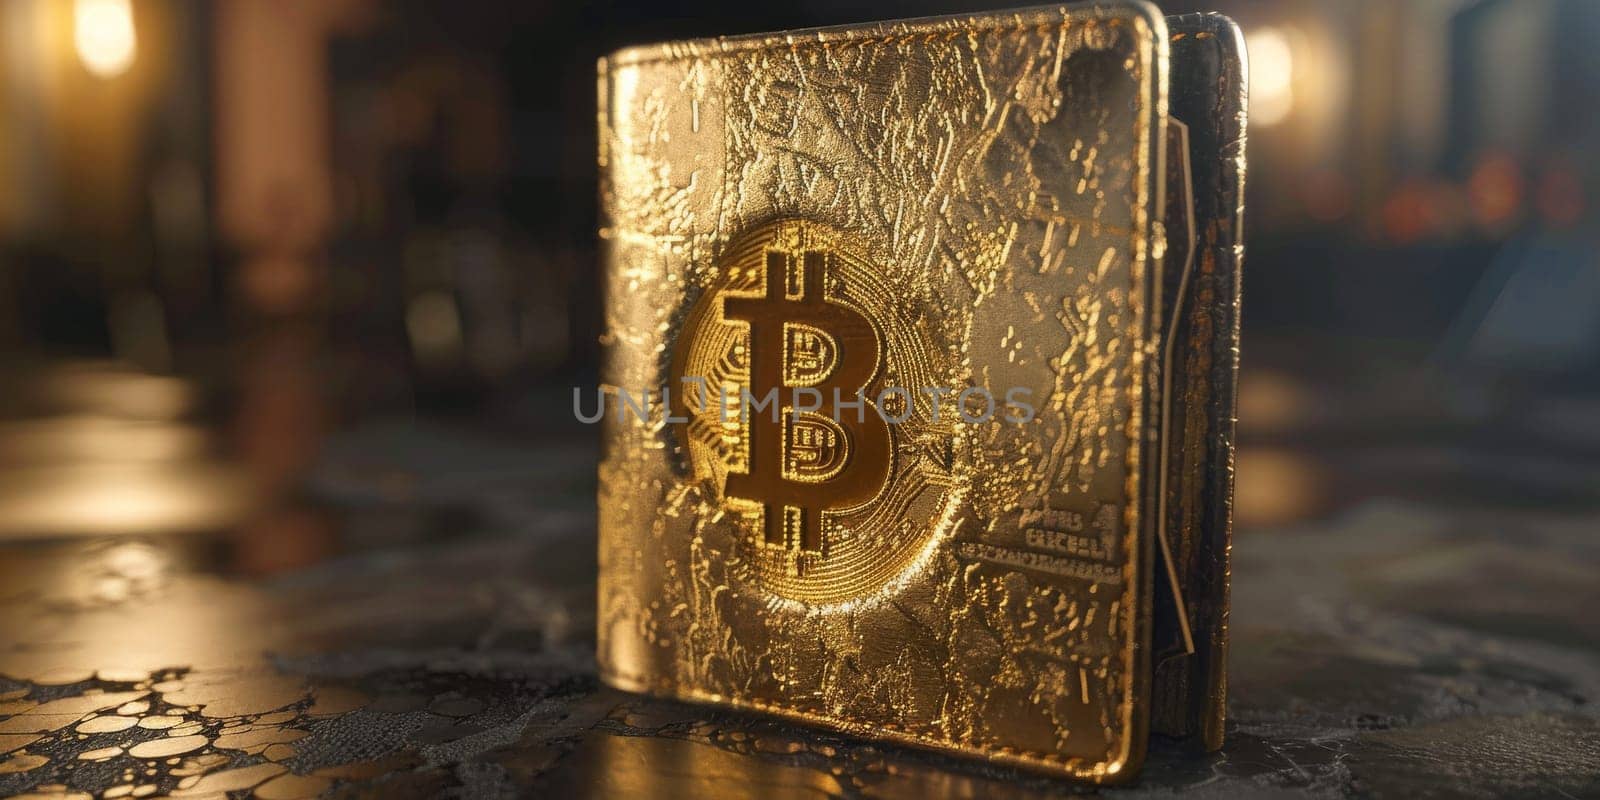 Bitcoin wallet, a financial and cryptocurrency concept